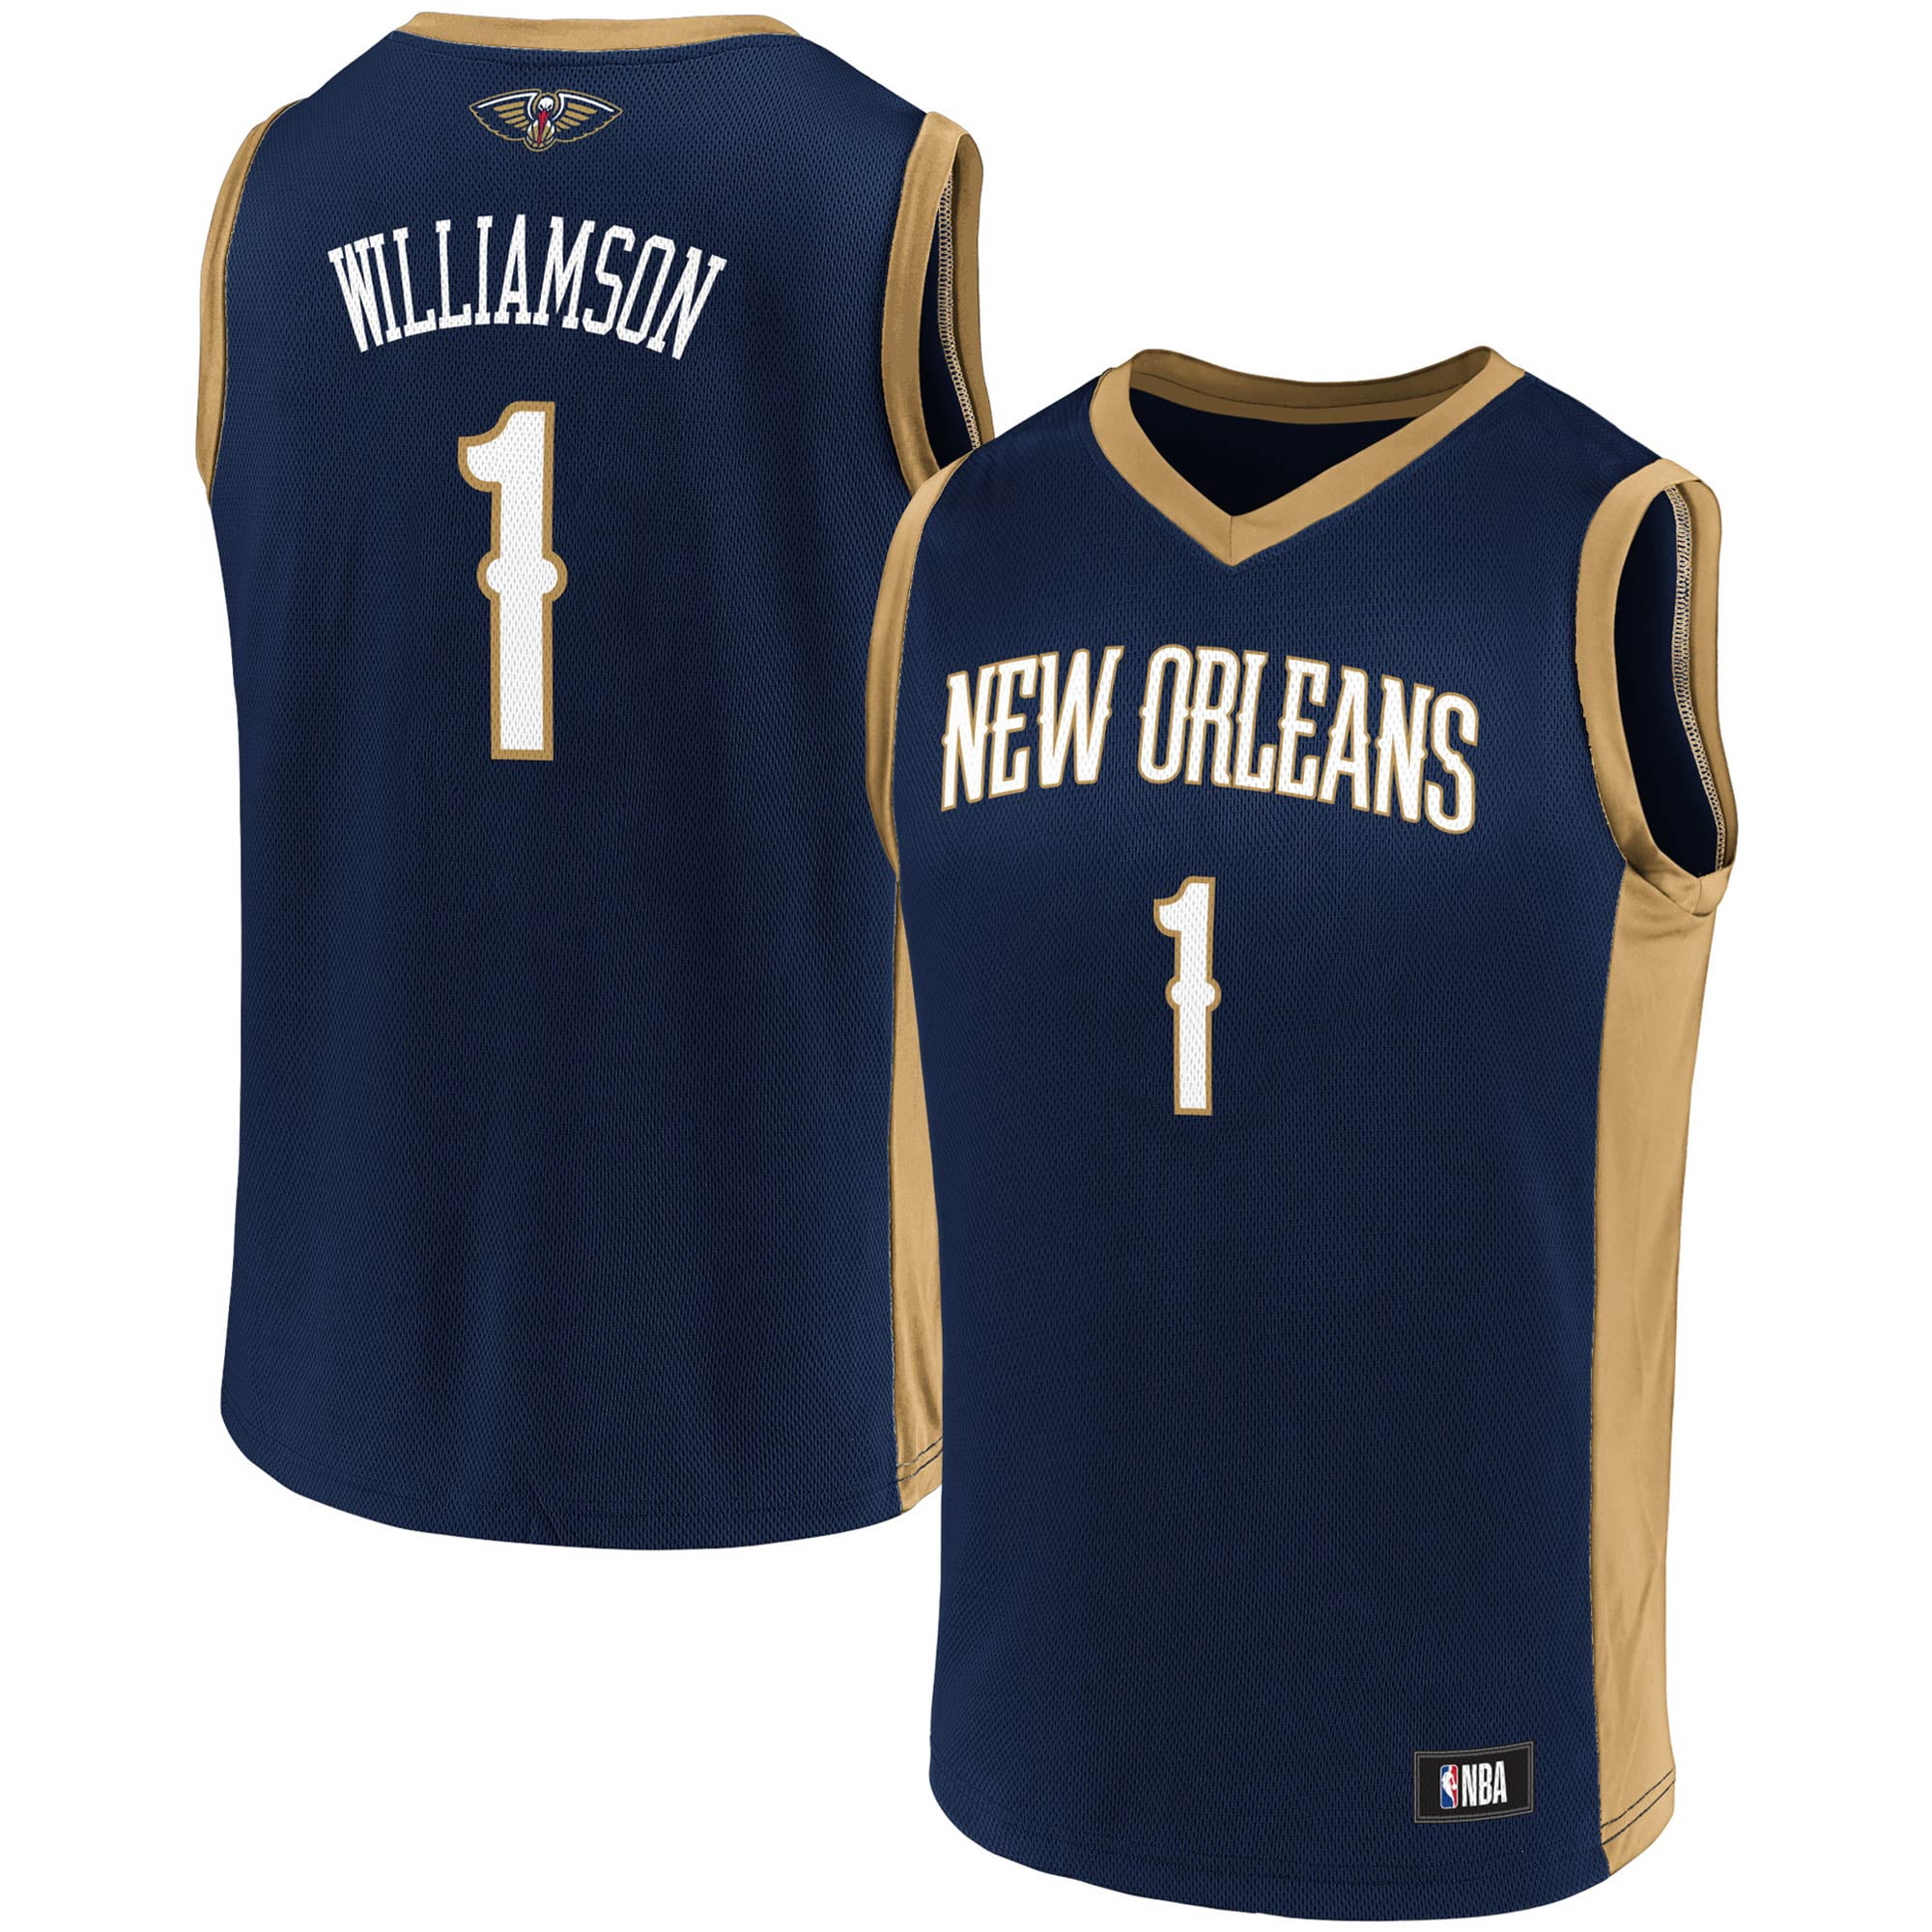 Infant Nike Zion Williamson Navy New Orleans Pelicans Replica